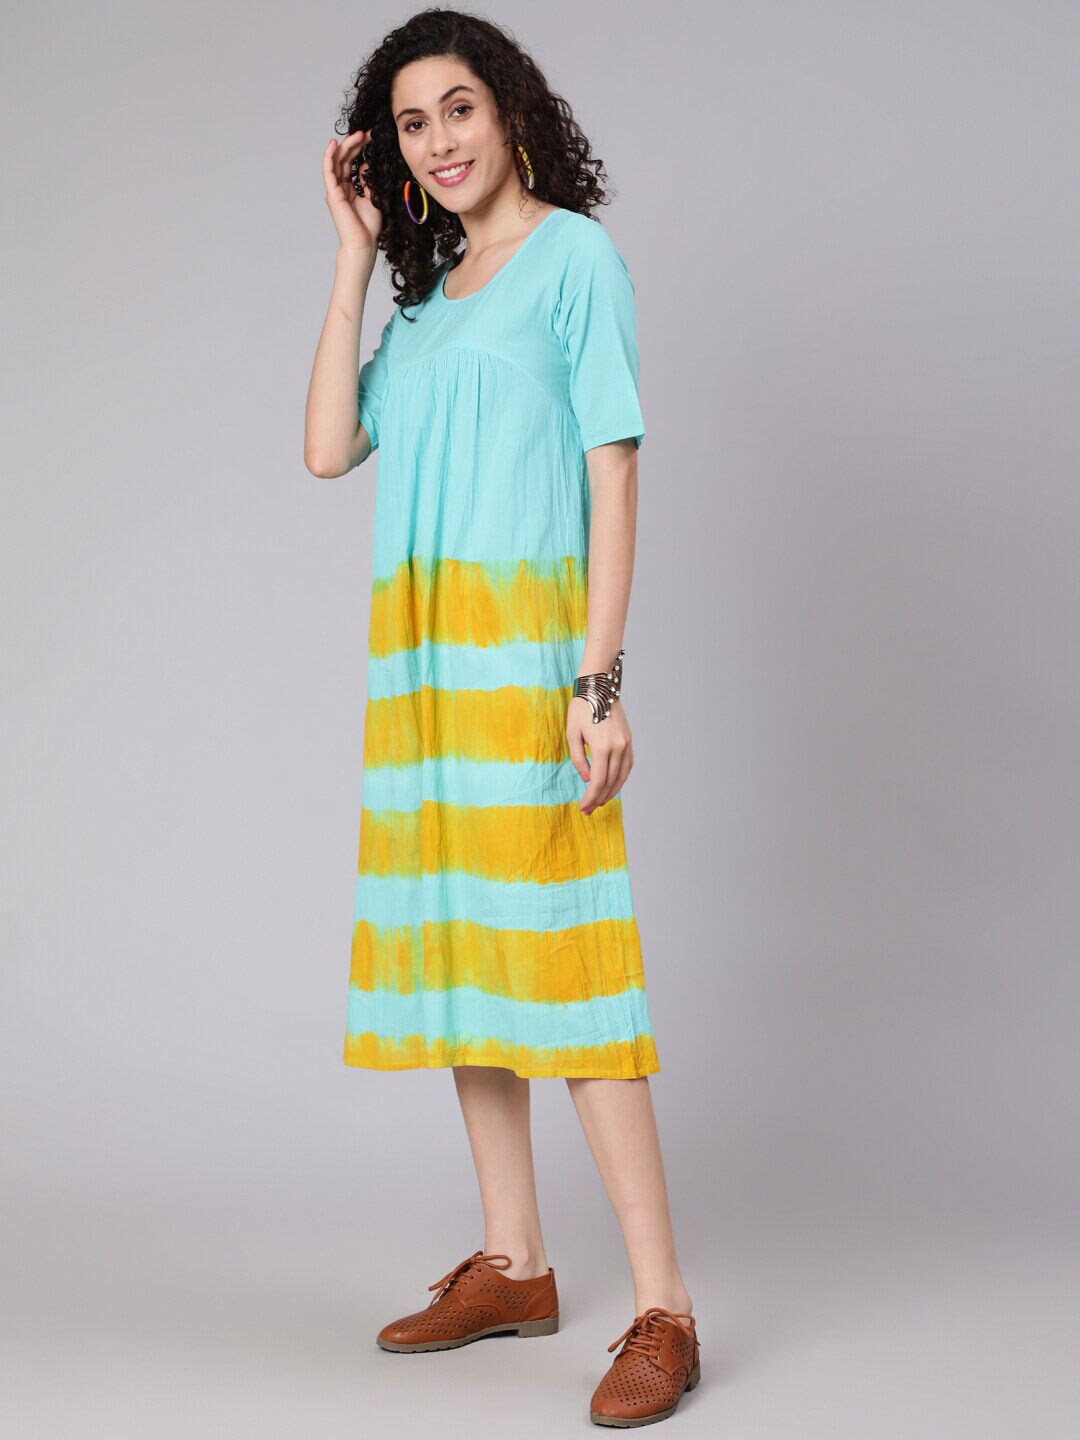 Awadhi Blue Tie and Dye Dyed A-Line Midi Dress Price in India